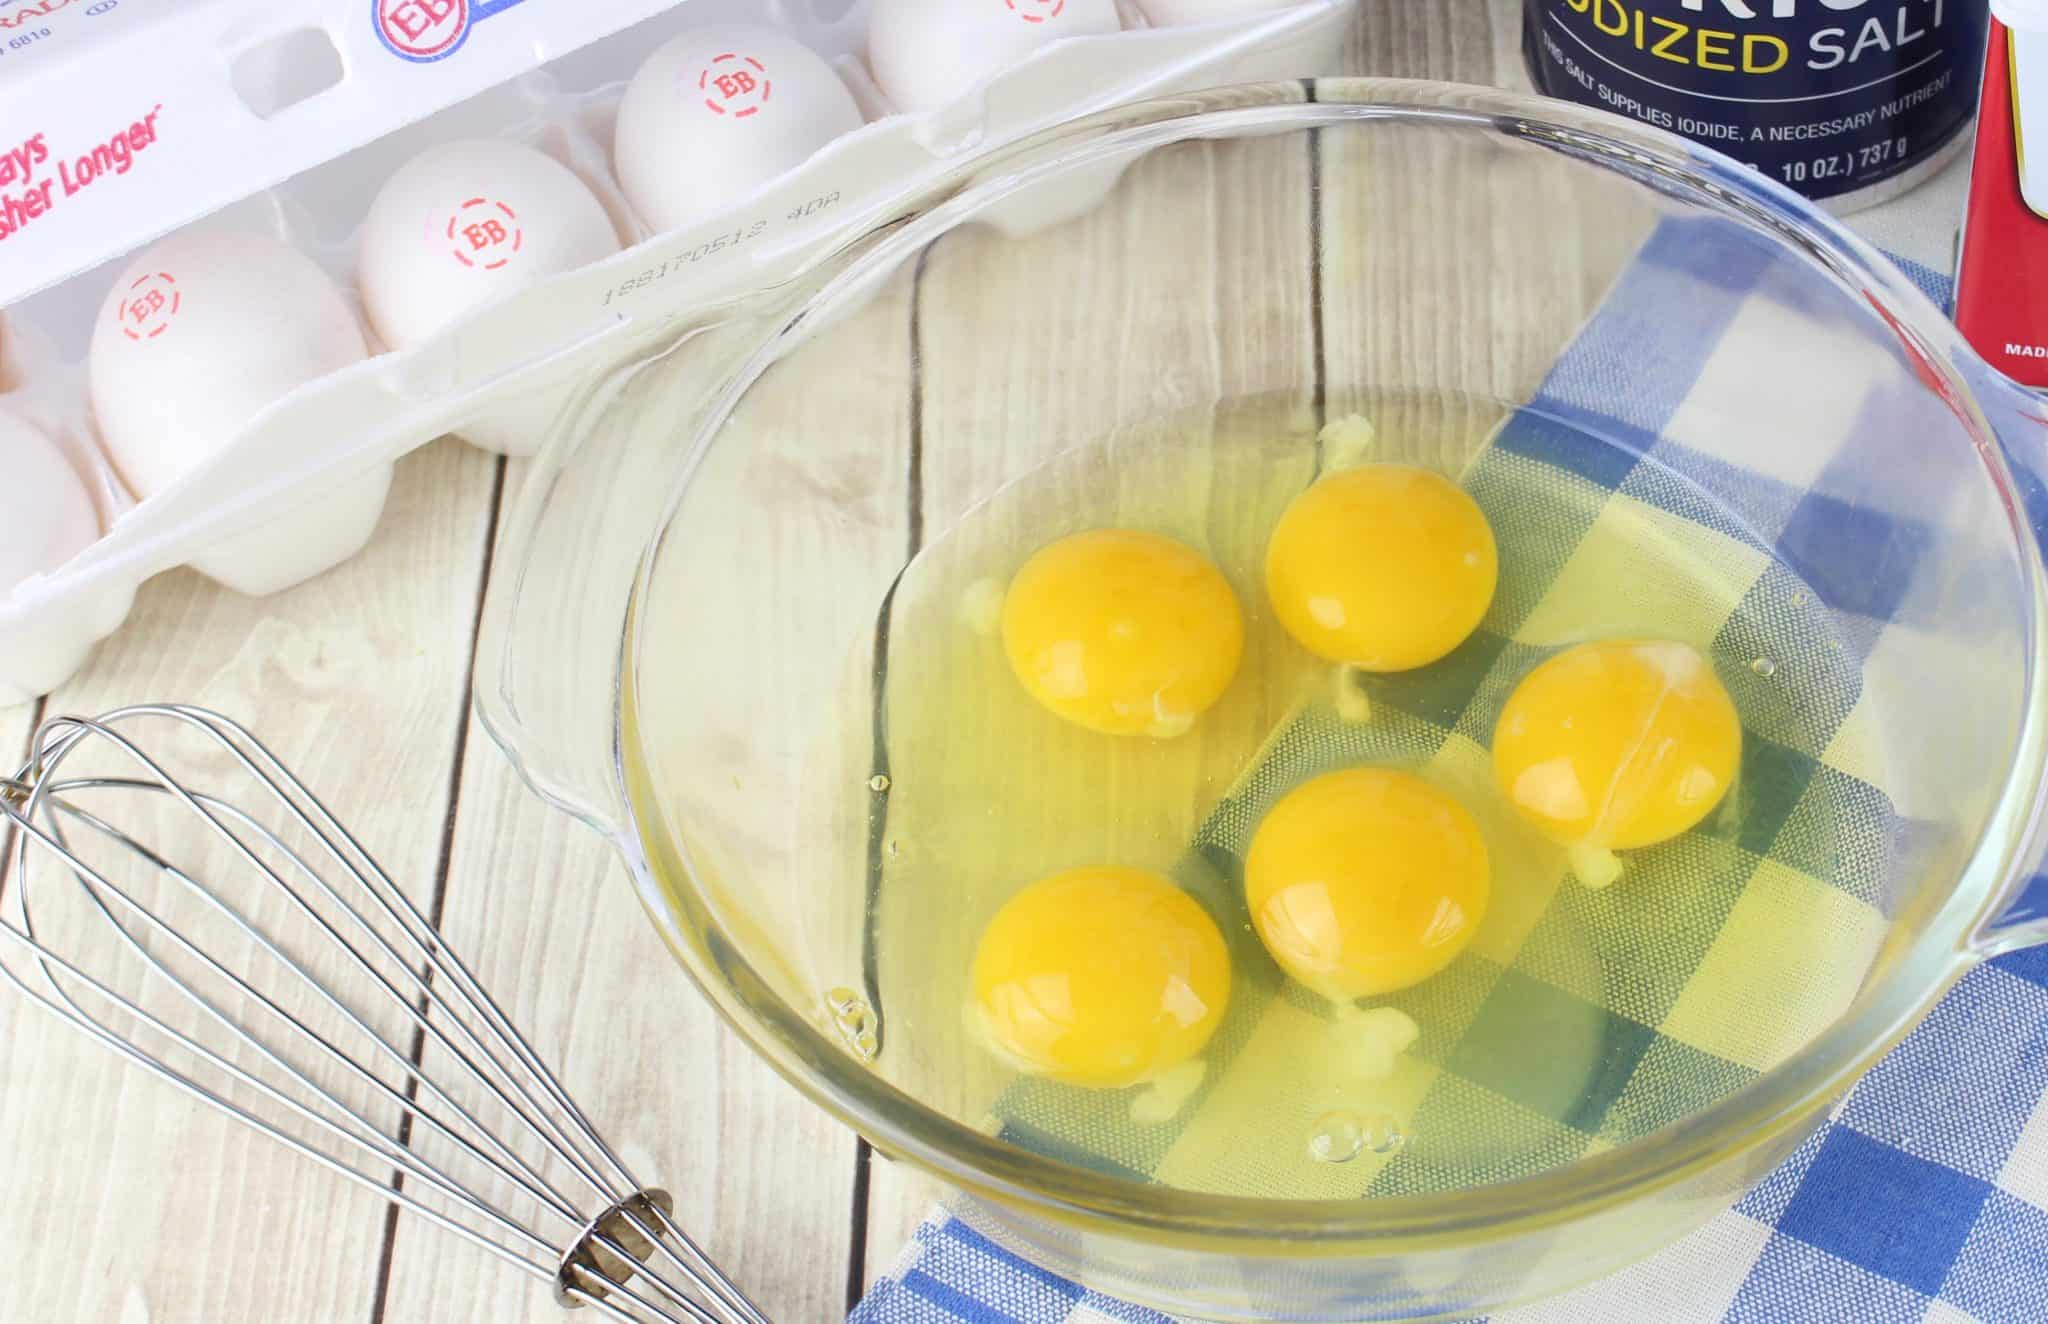 cracked eggs in a clear bowl.